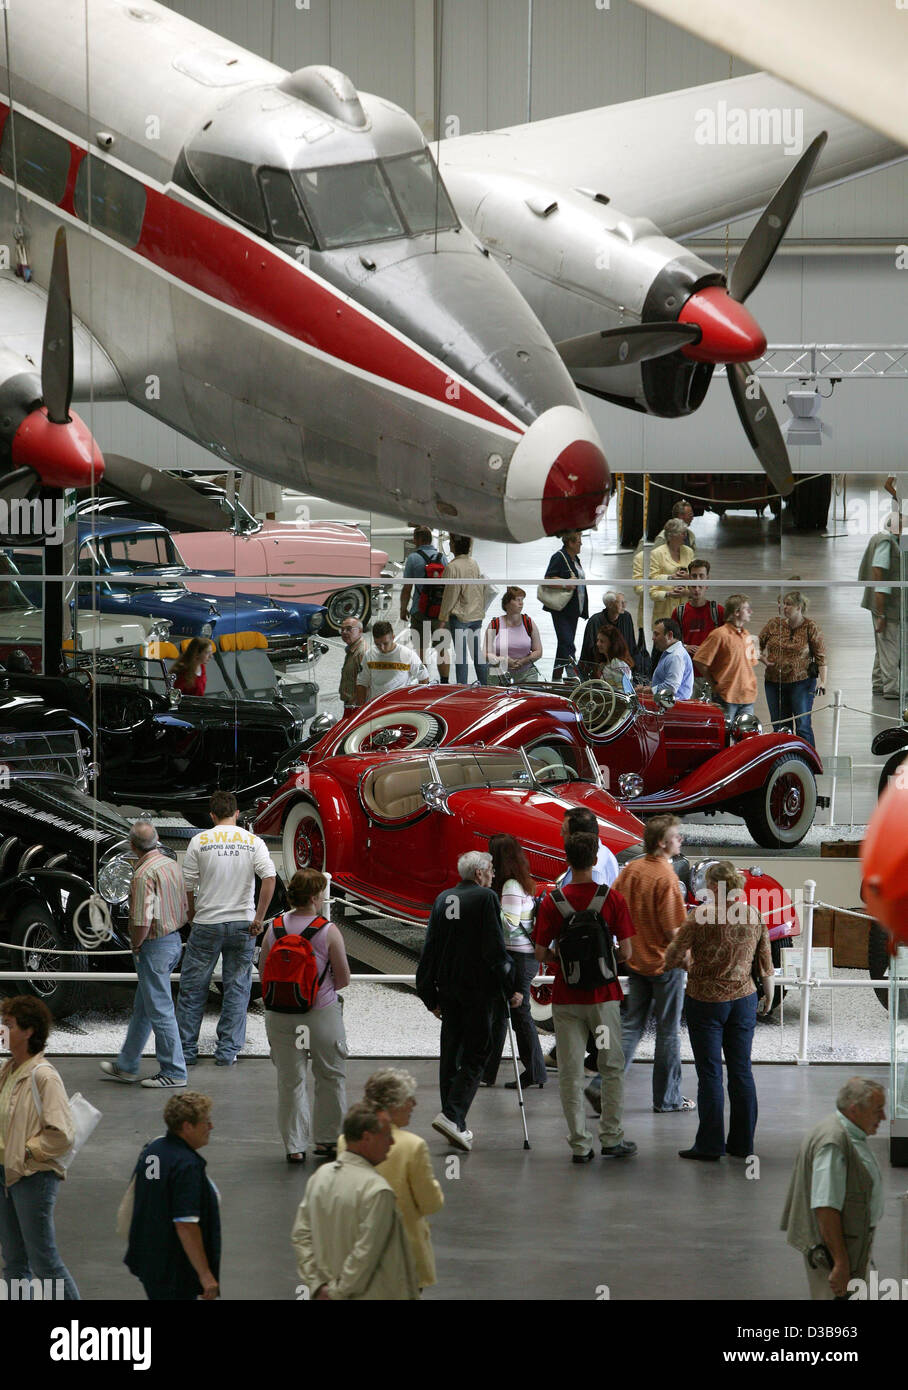 (dpa) - The picture shows visitors at the Automobile and Technology Museum in Sinsheim, Germany, Wednesday, 6 July 2005. More than 3,000 objects are on display in the exhibition hall covering 30,000 sqm. The outdoor area features the supersonic plane Concorde and a Russian Tupolev 144. The museum is Stock Photo